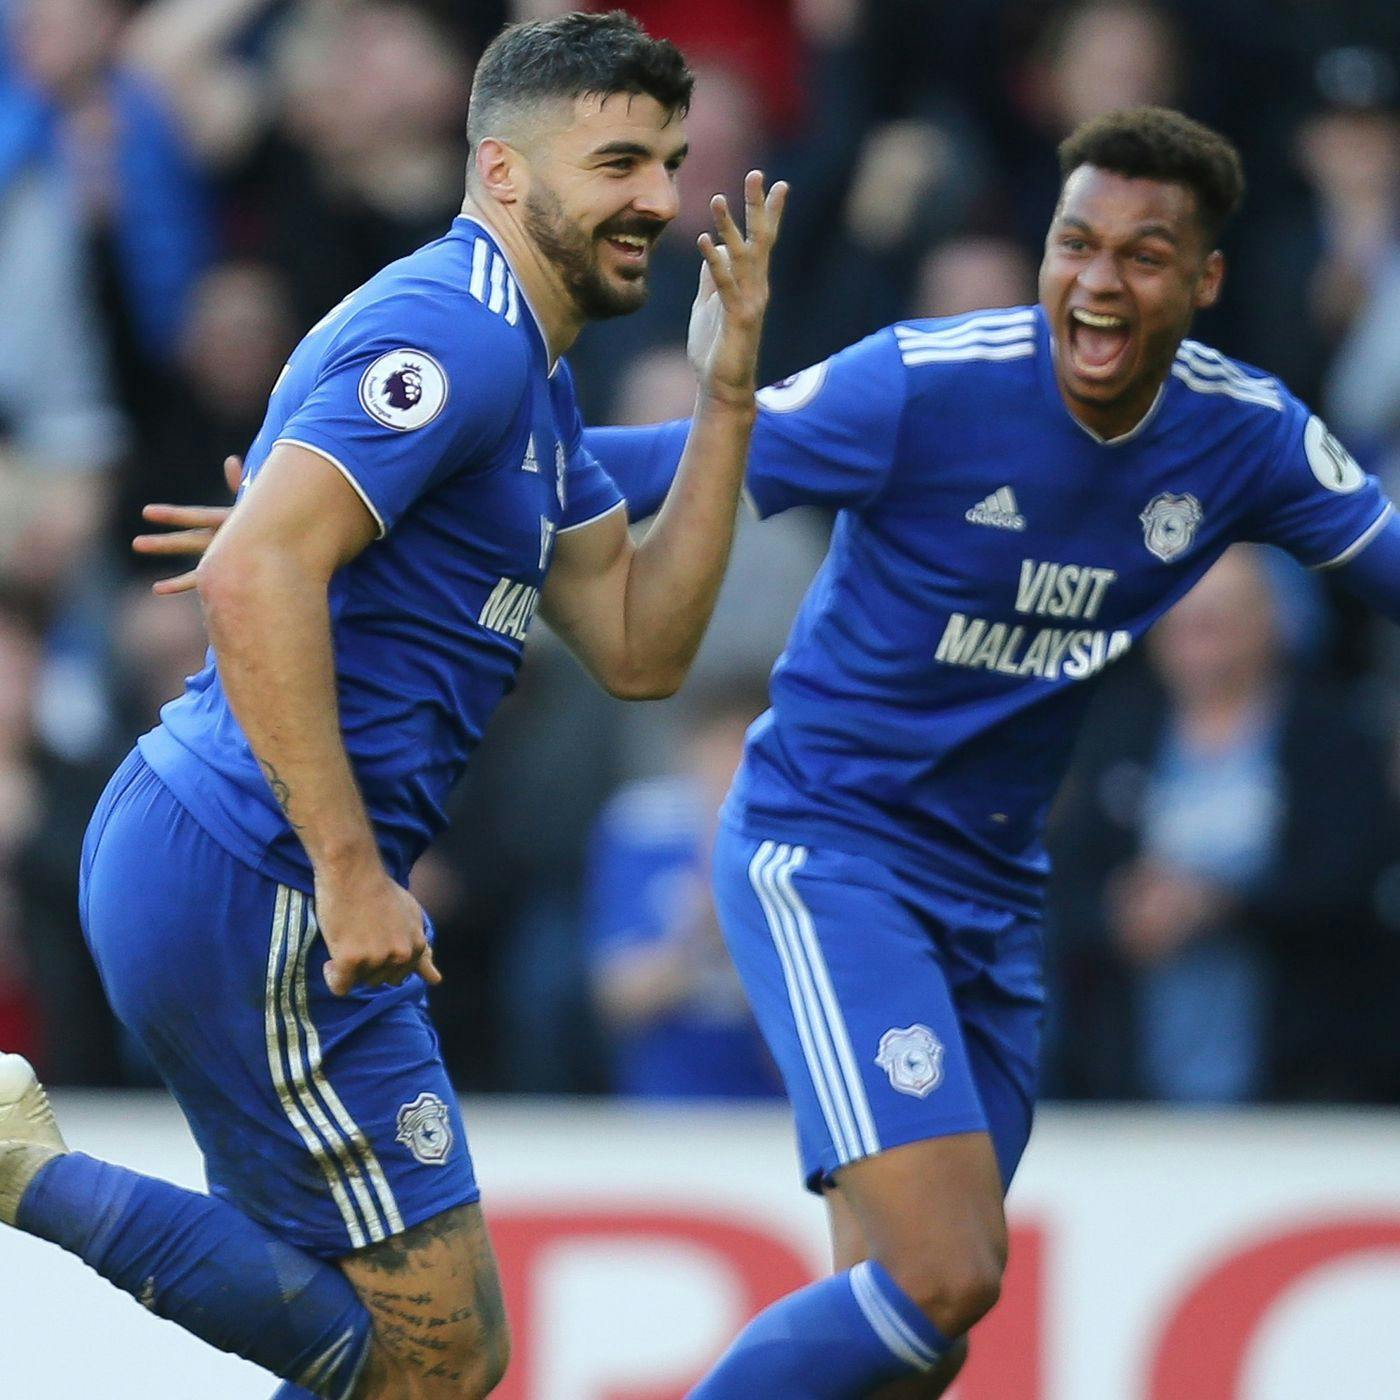 'Cardiff's attack bossed Fulham but Paterson is a stop-gap'